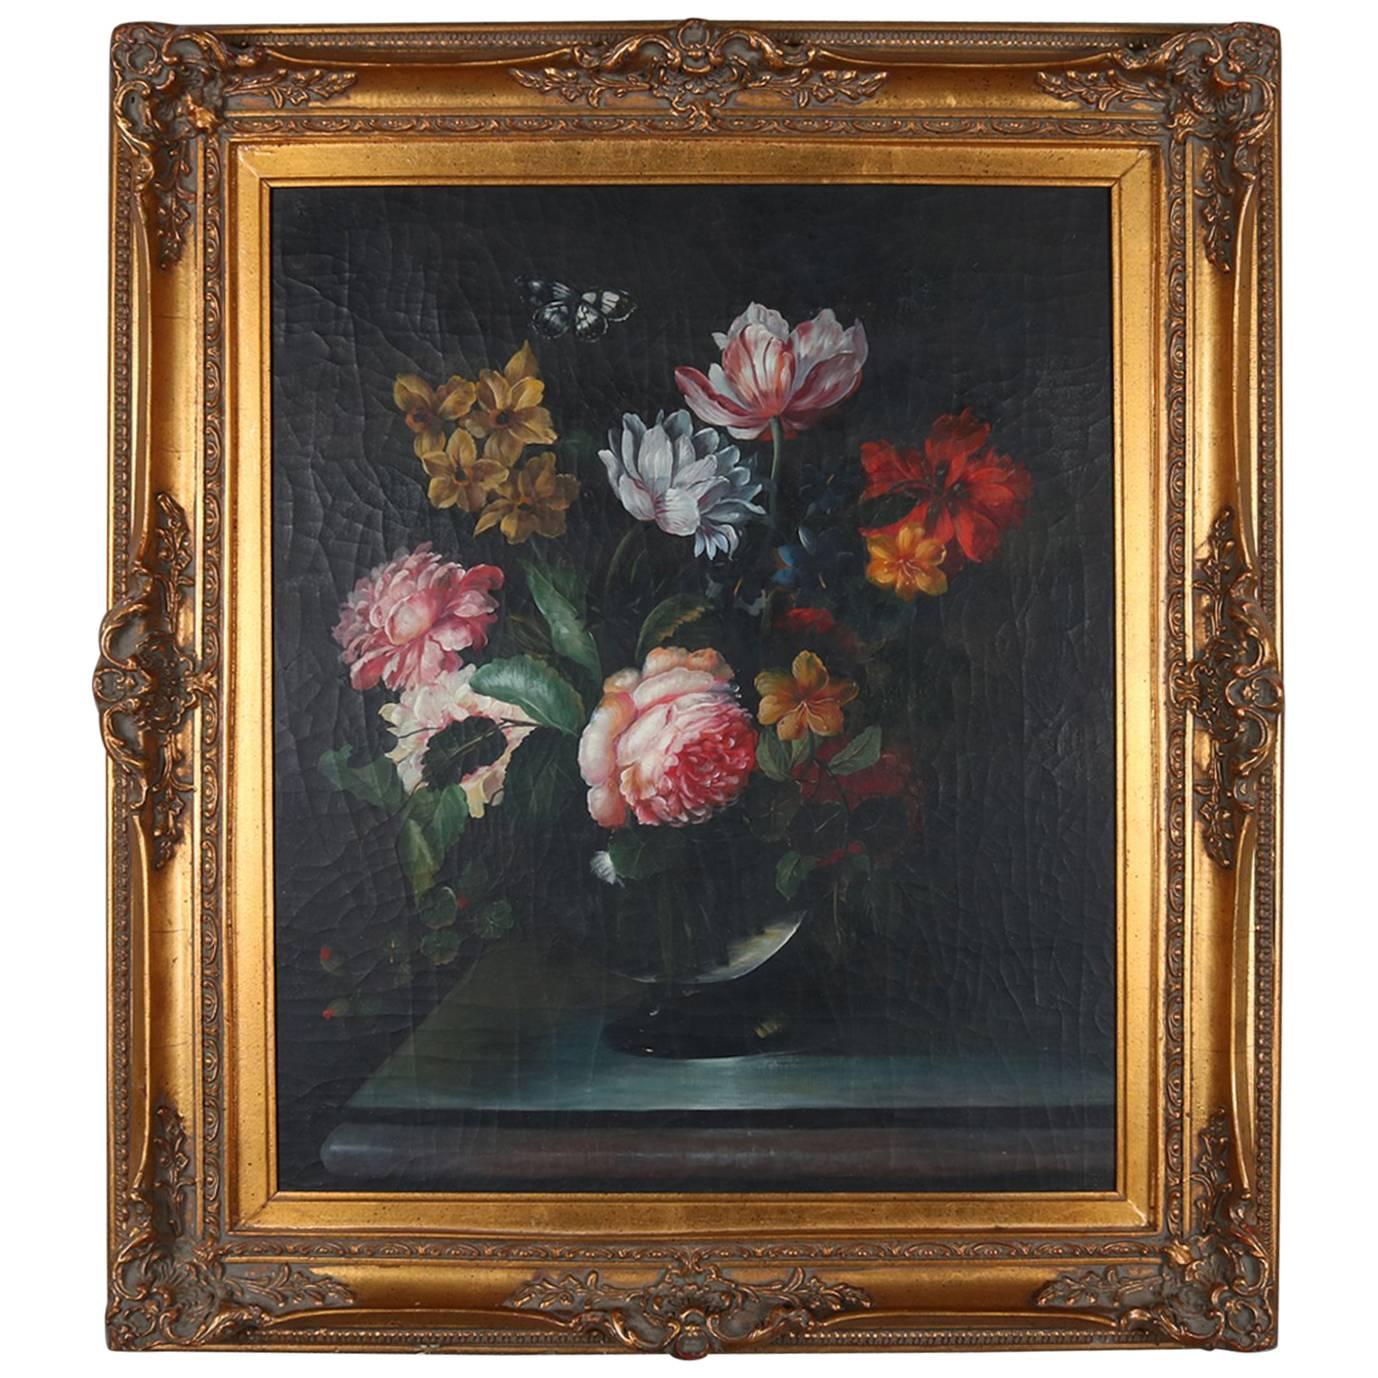 Oil on Board Still Life Painting of Floral Bouquet in Vase, Gilt Frame